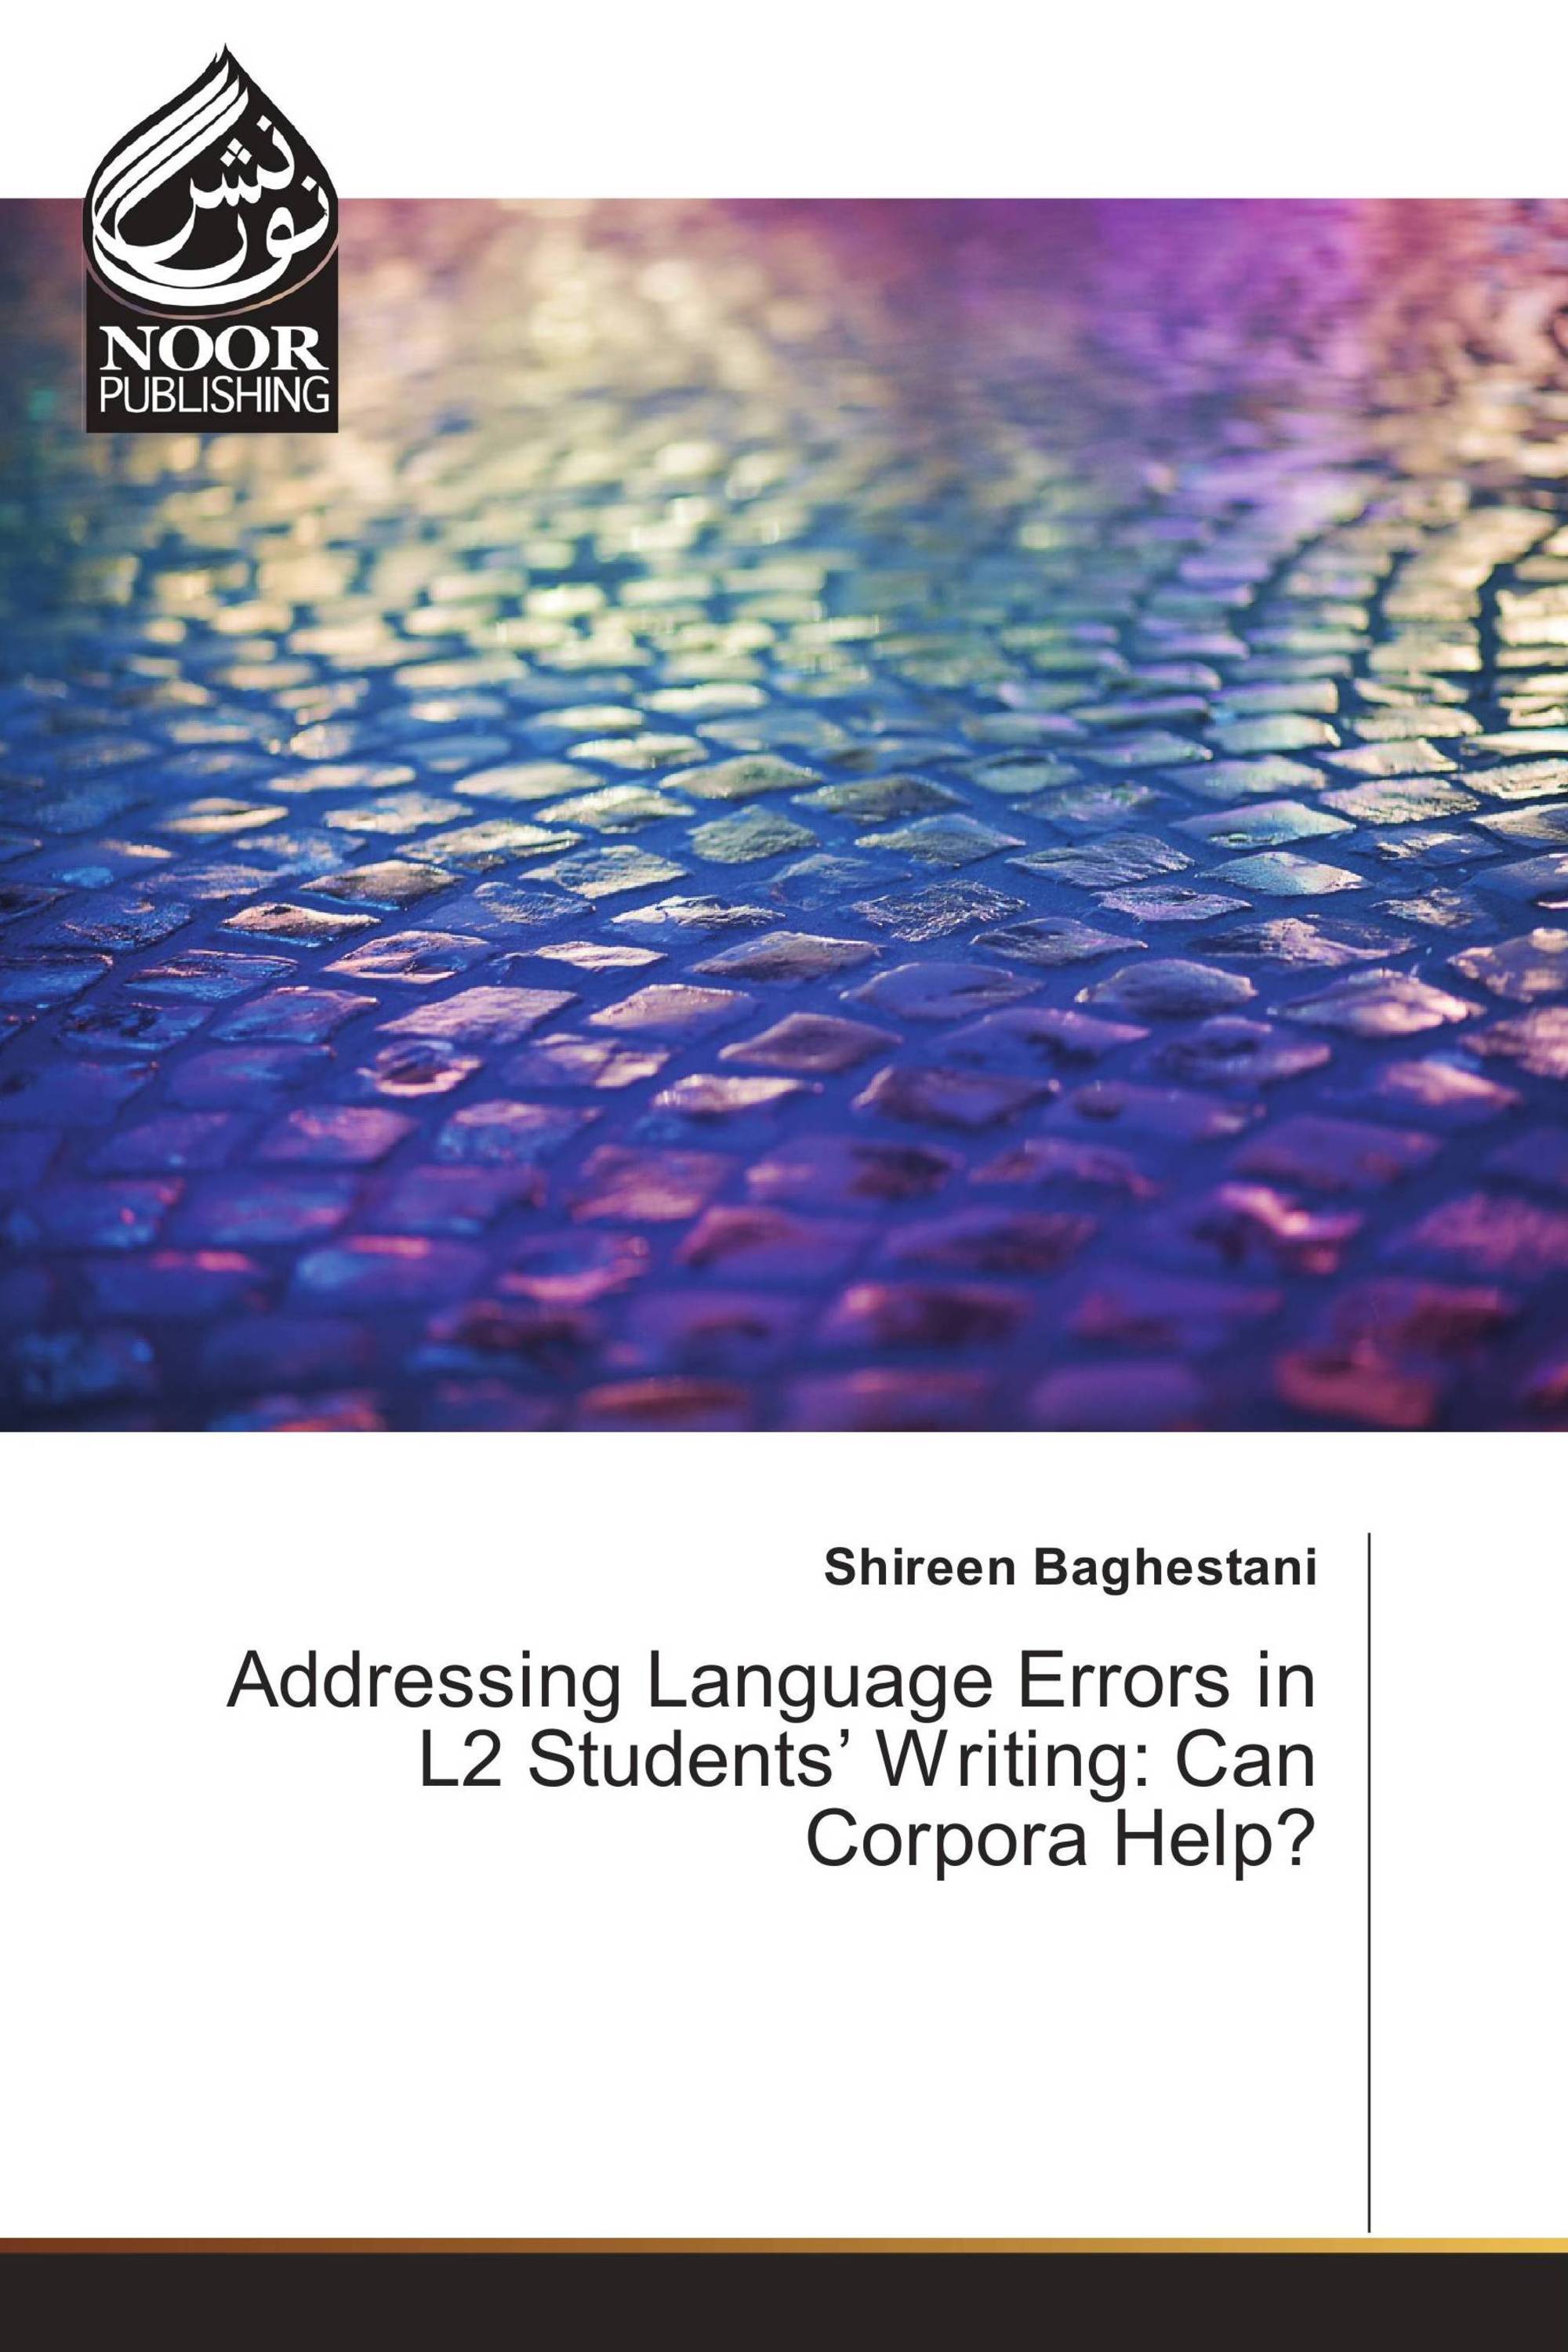 Addressing Language Errors in L2 Students’ Writing: Can Corpora Help?